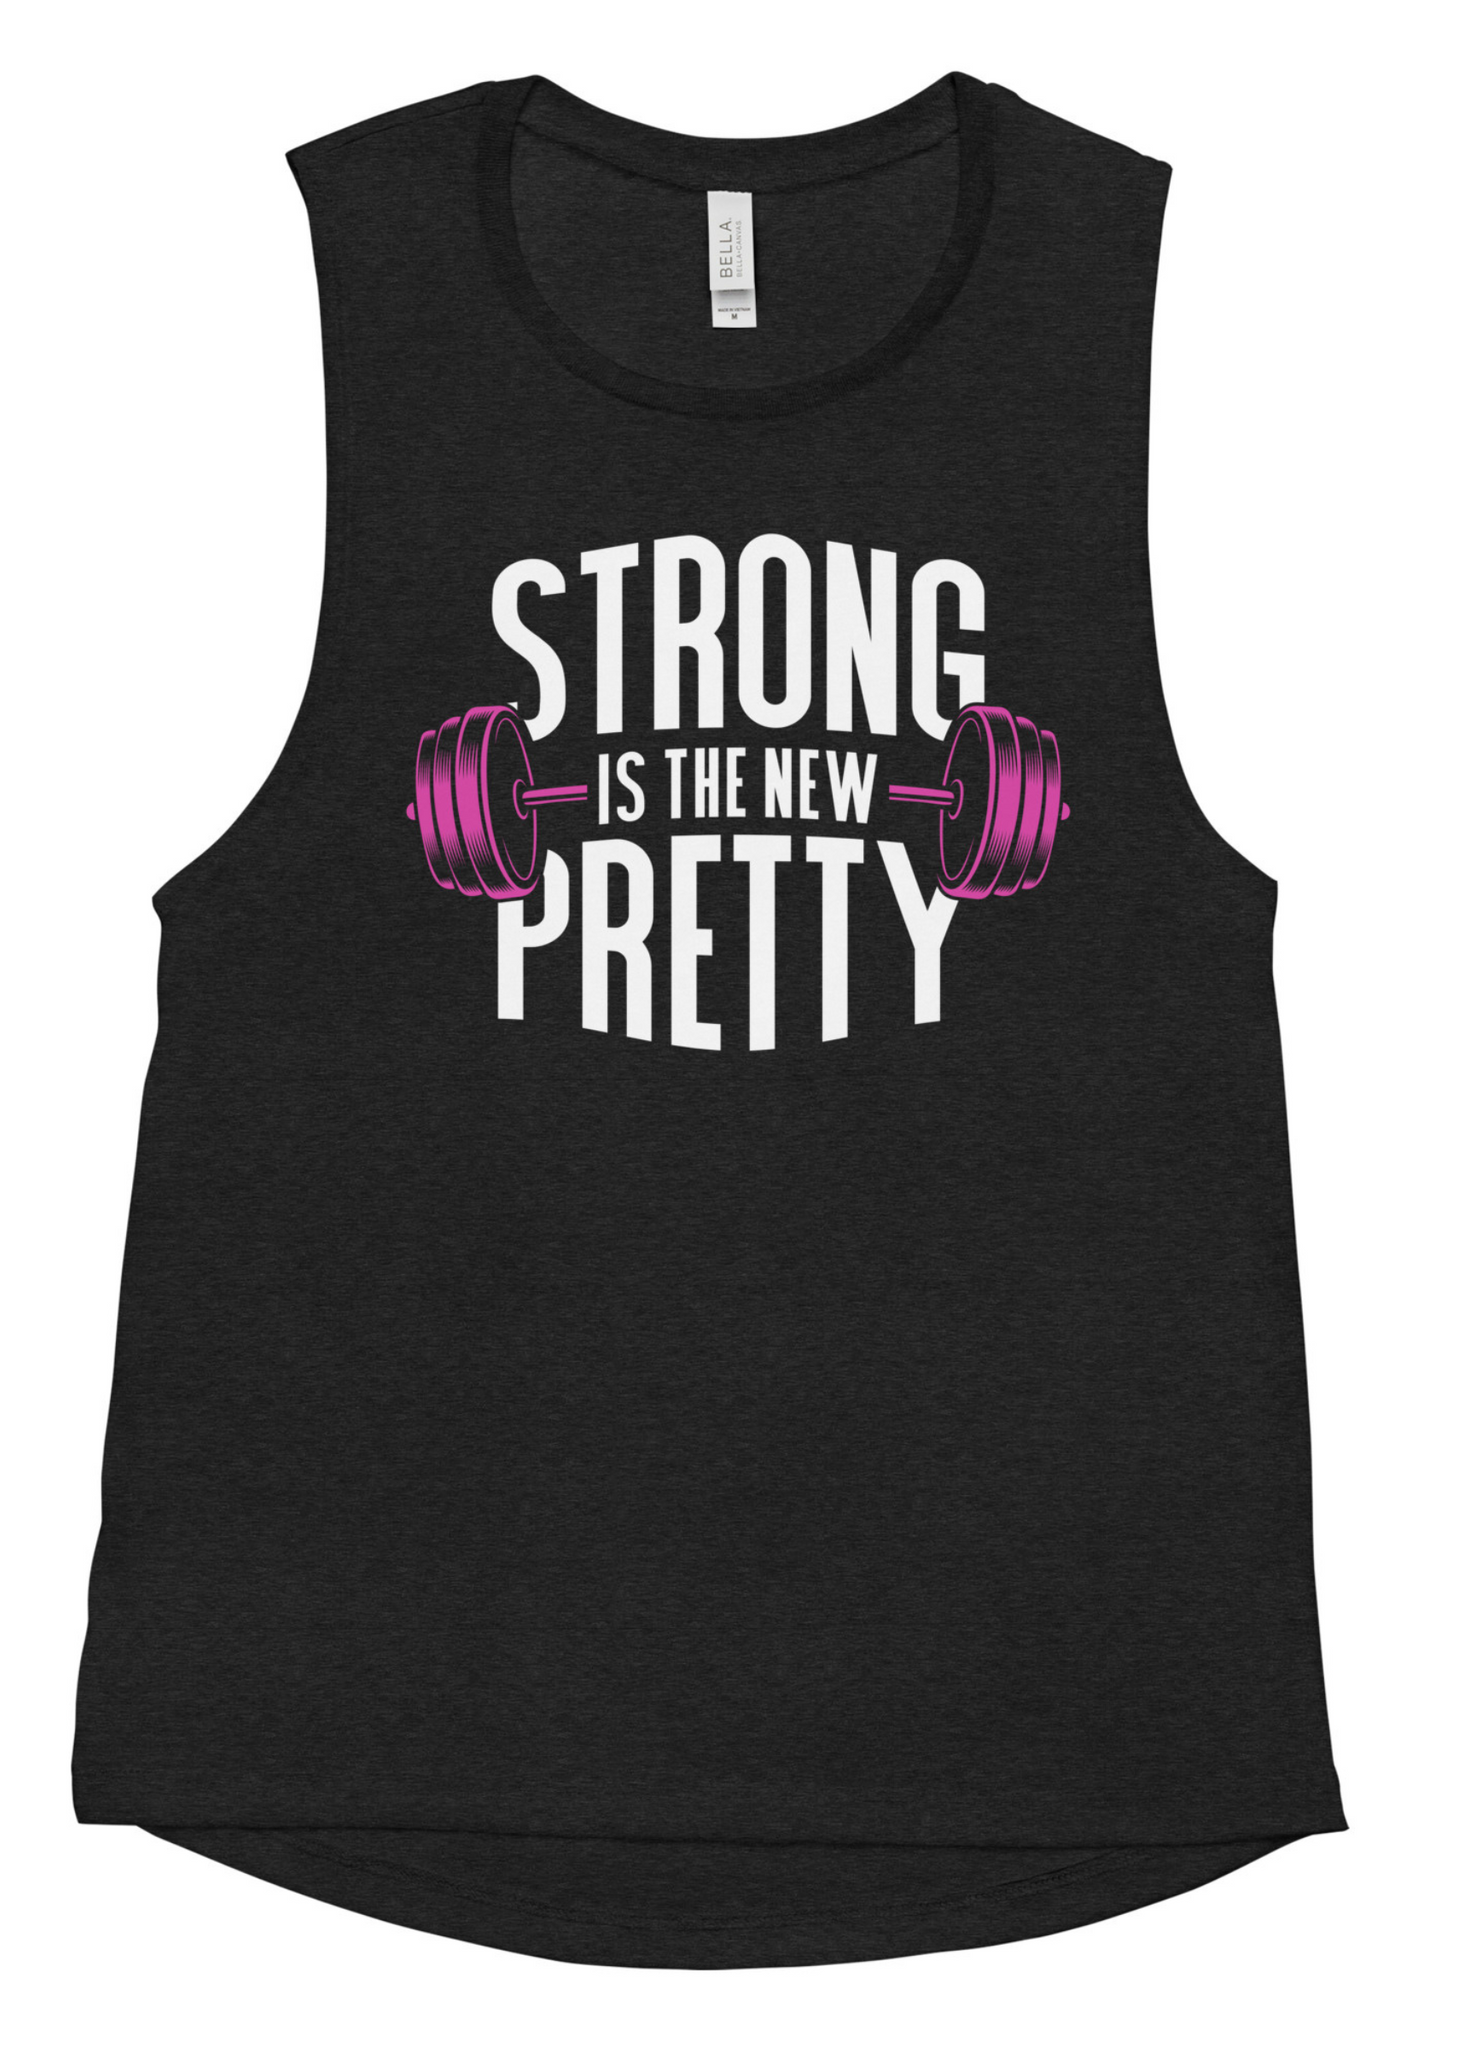 STRONG IS THE NEW PRETTY